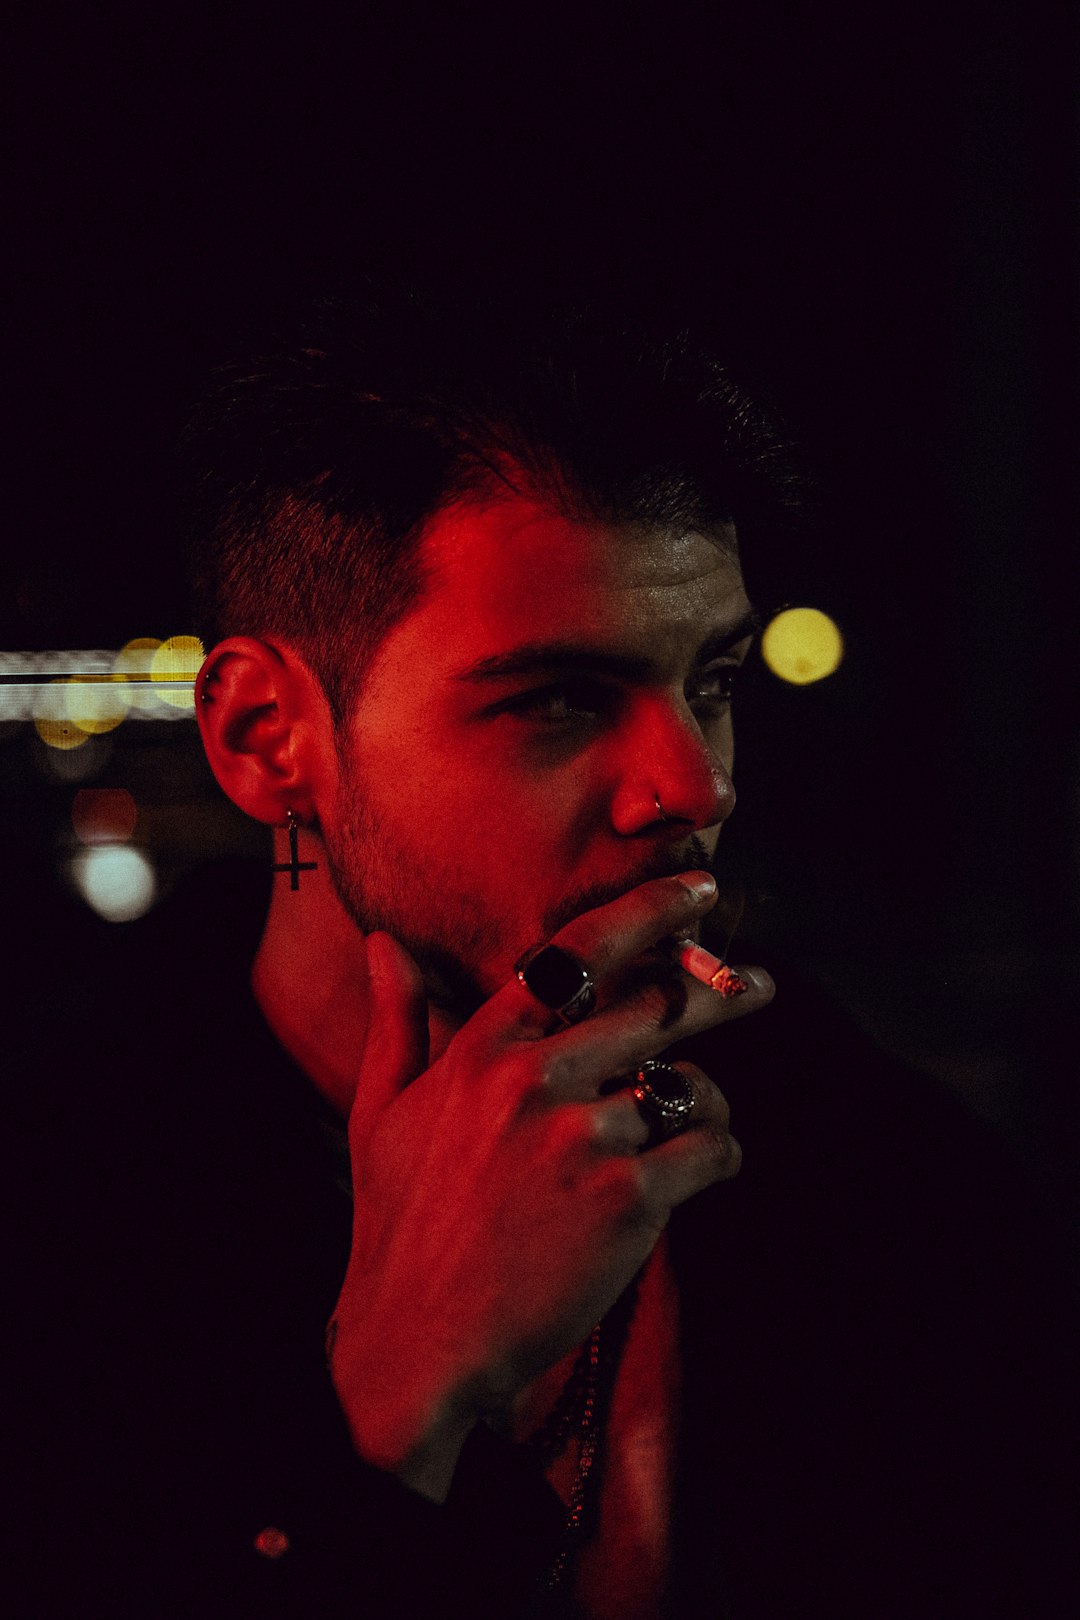 man smoking cigarette in close up photography